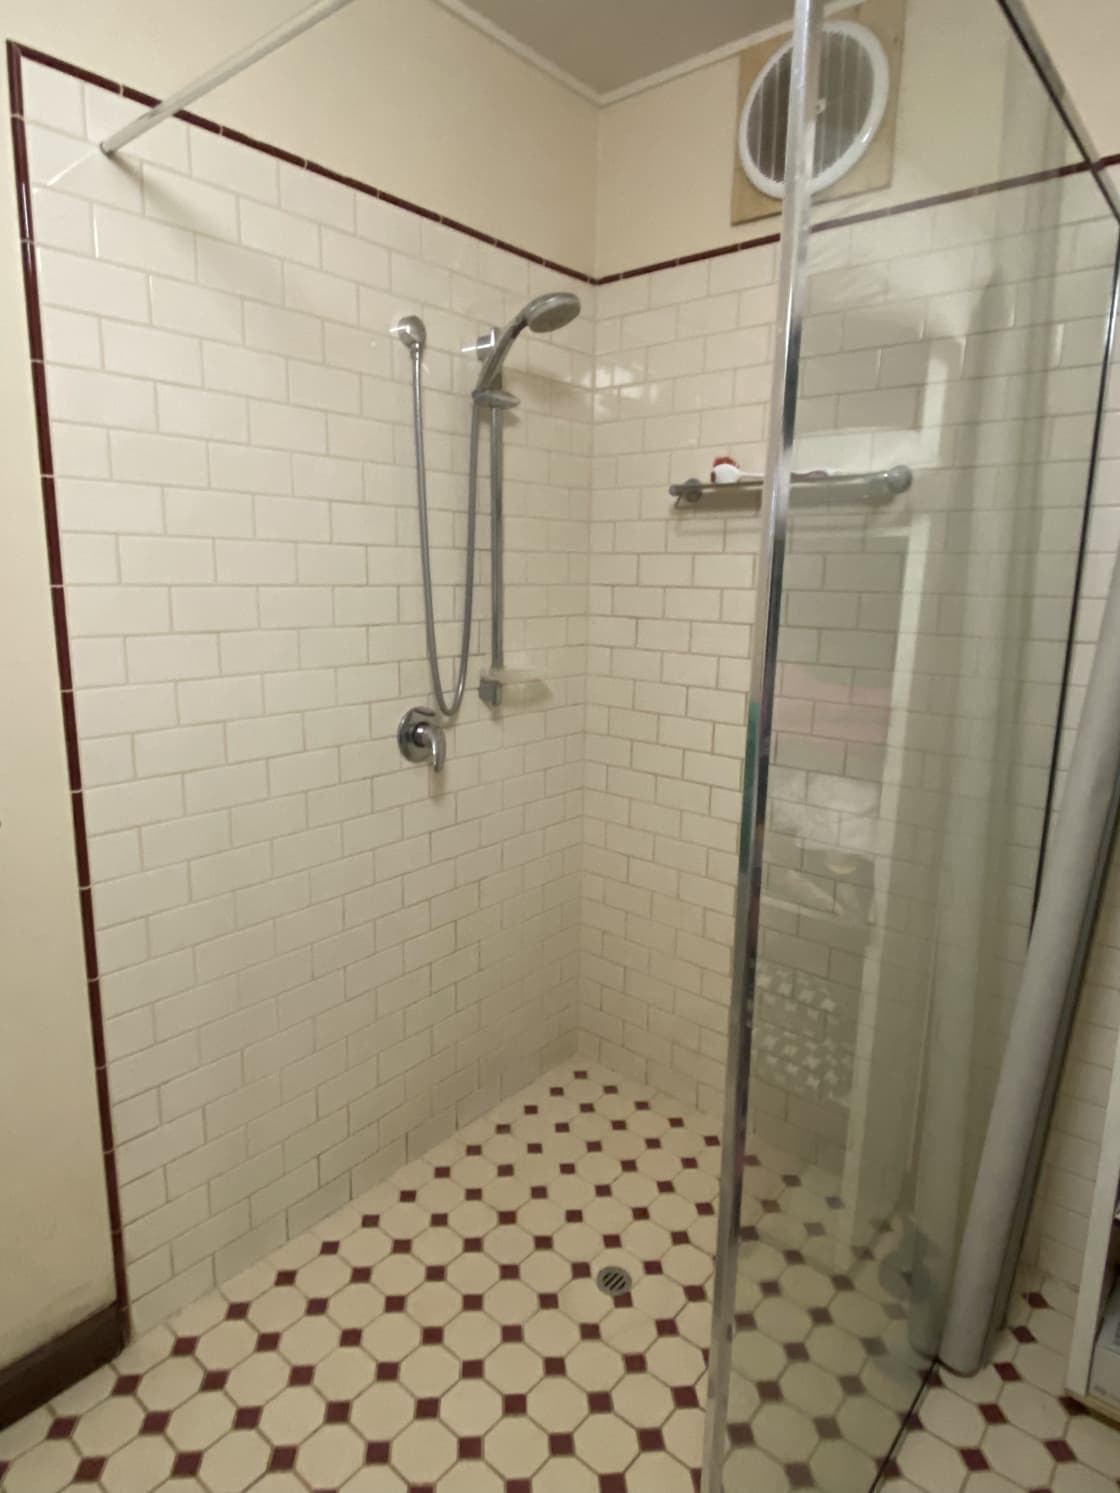 Shower within host house, 
please note at times it may not be available during your stay due to unforeseen circumstances